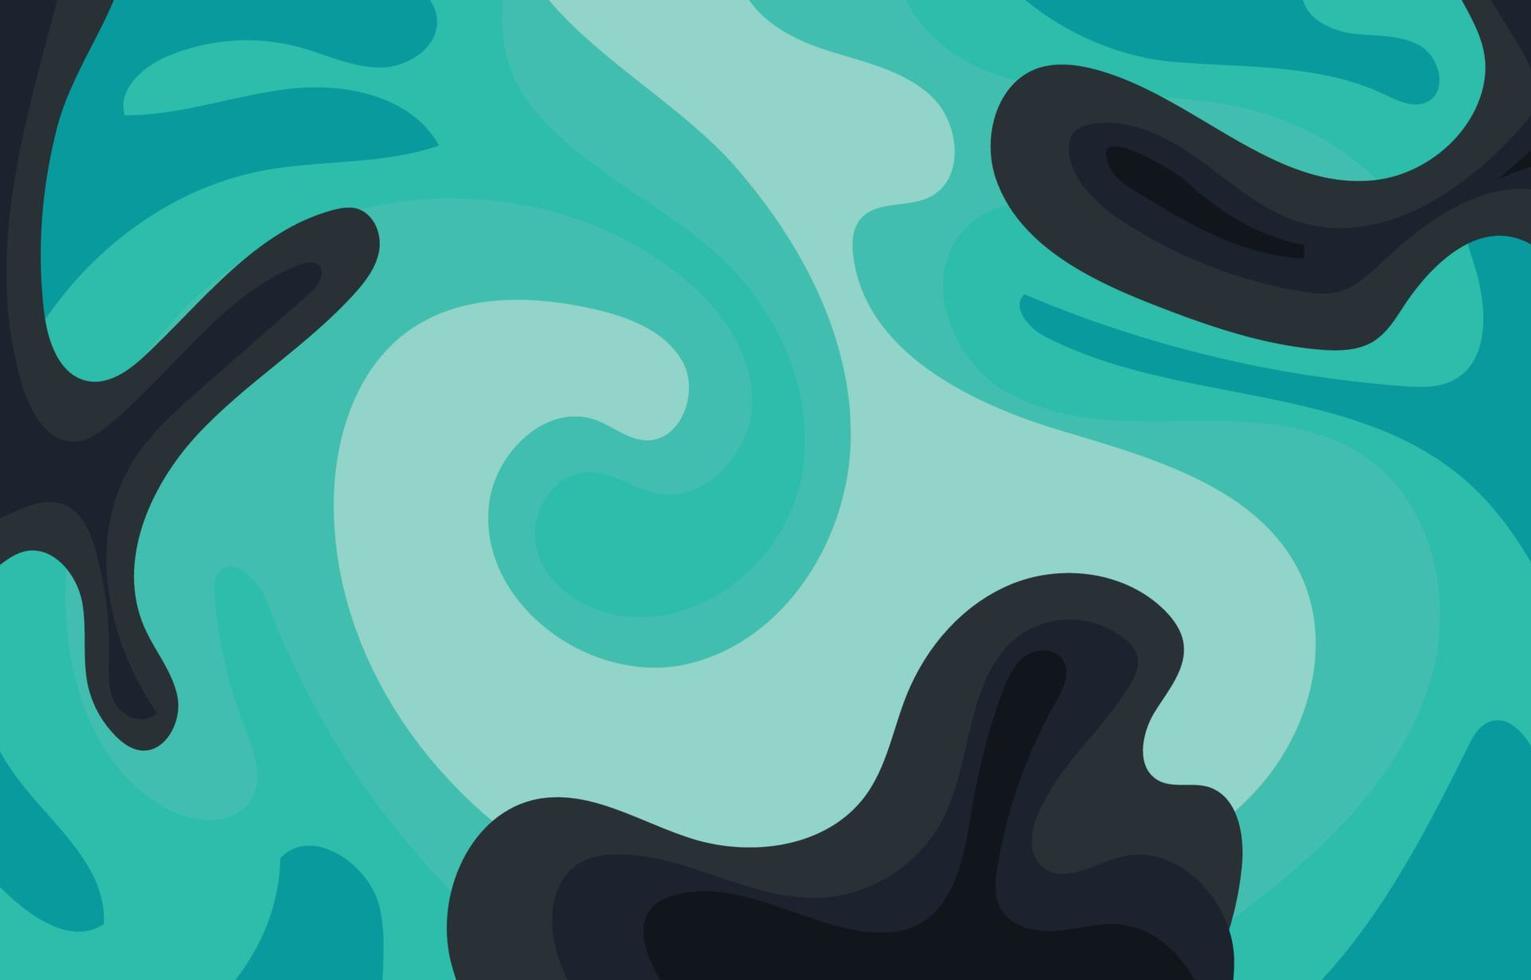 Abstract Cloudy Wave vector